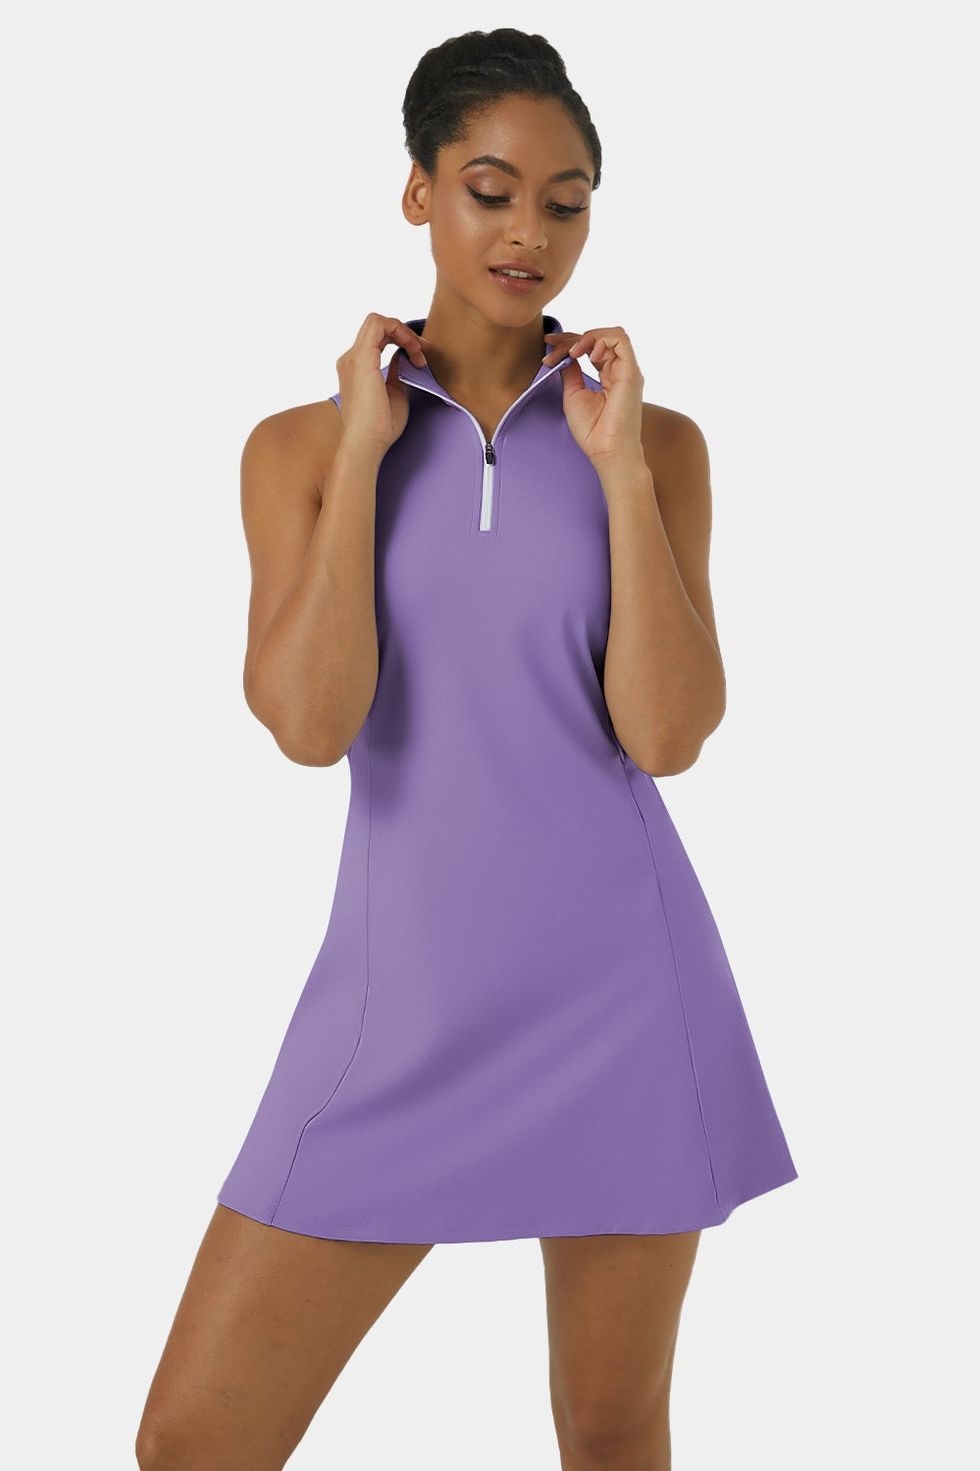 12 Best Workout Dresses for Women 2023 - Top Exercise Dresses